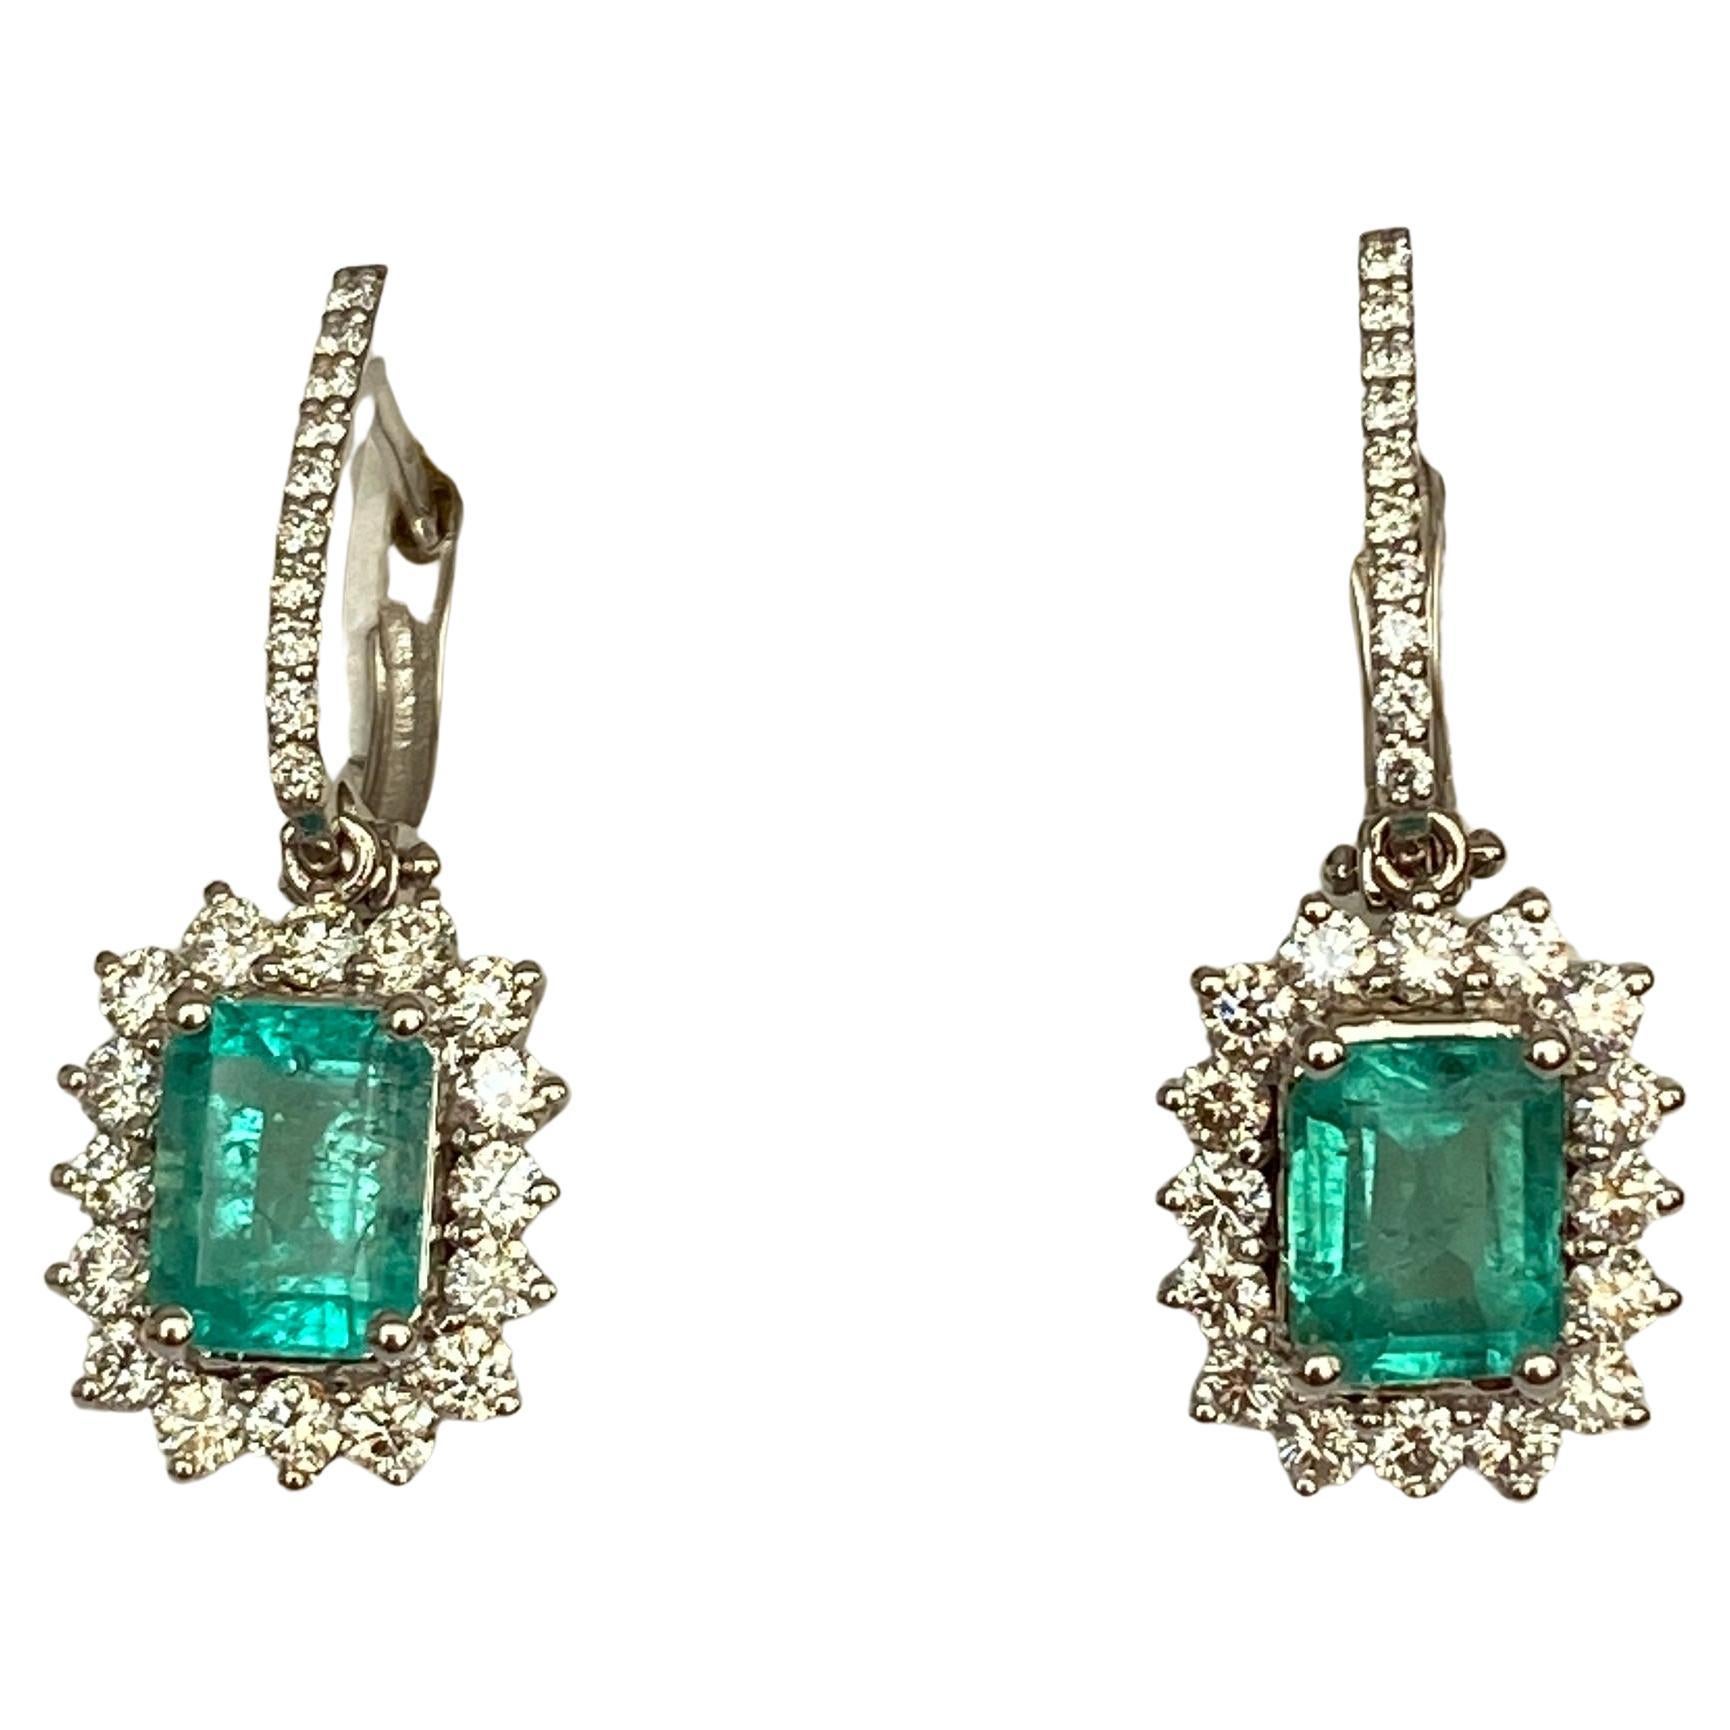 ALGT Certified 18 kt. White gold Dangle Earrings with Emerald and  Diamonds